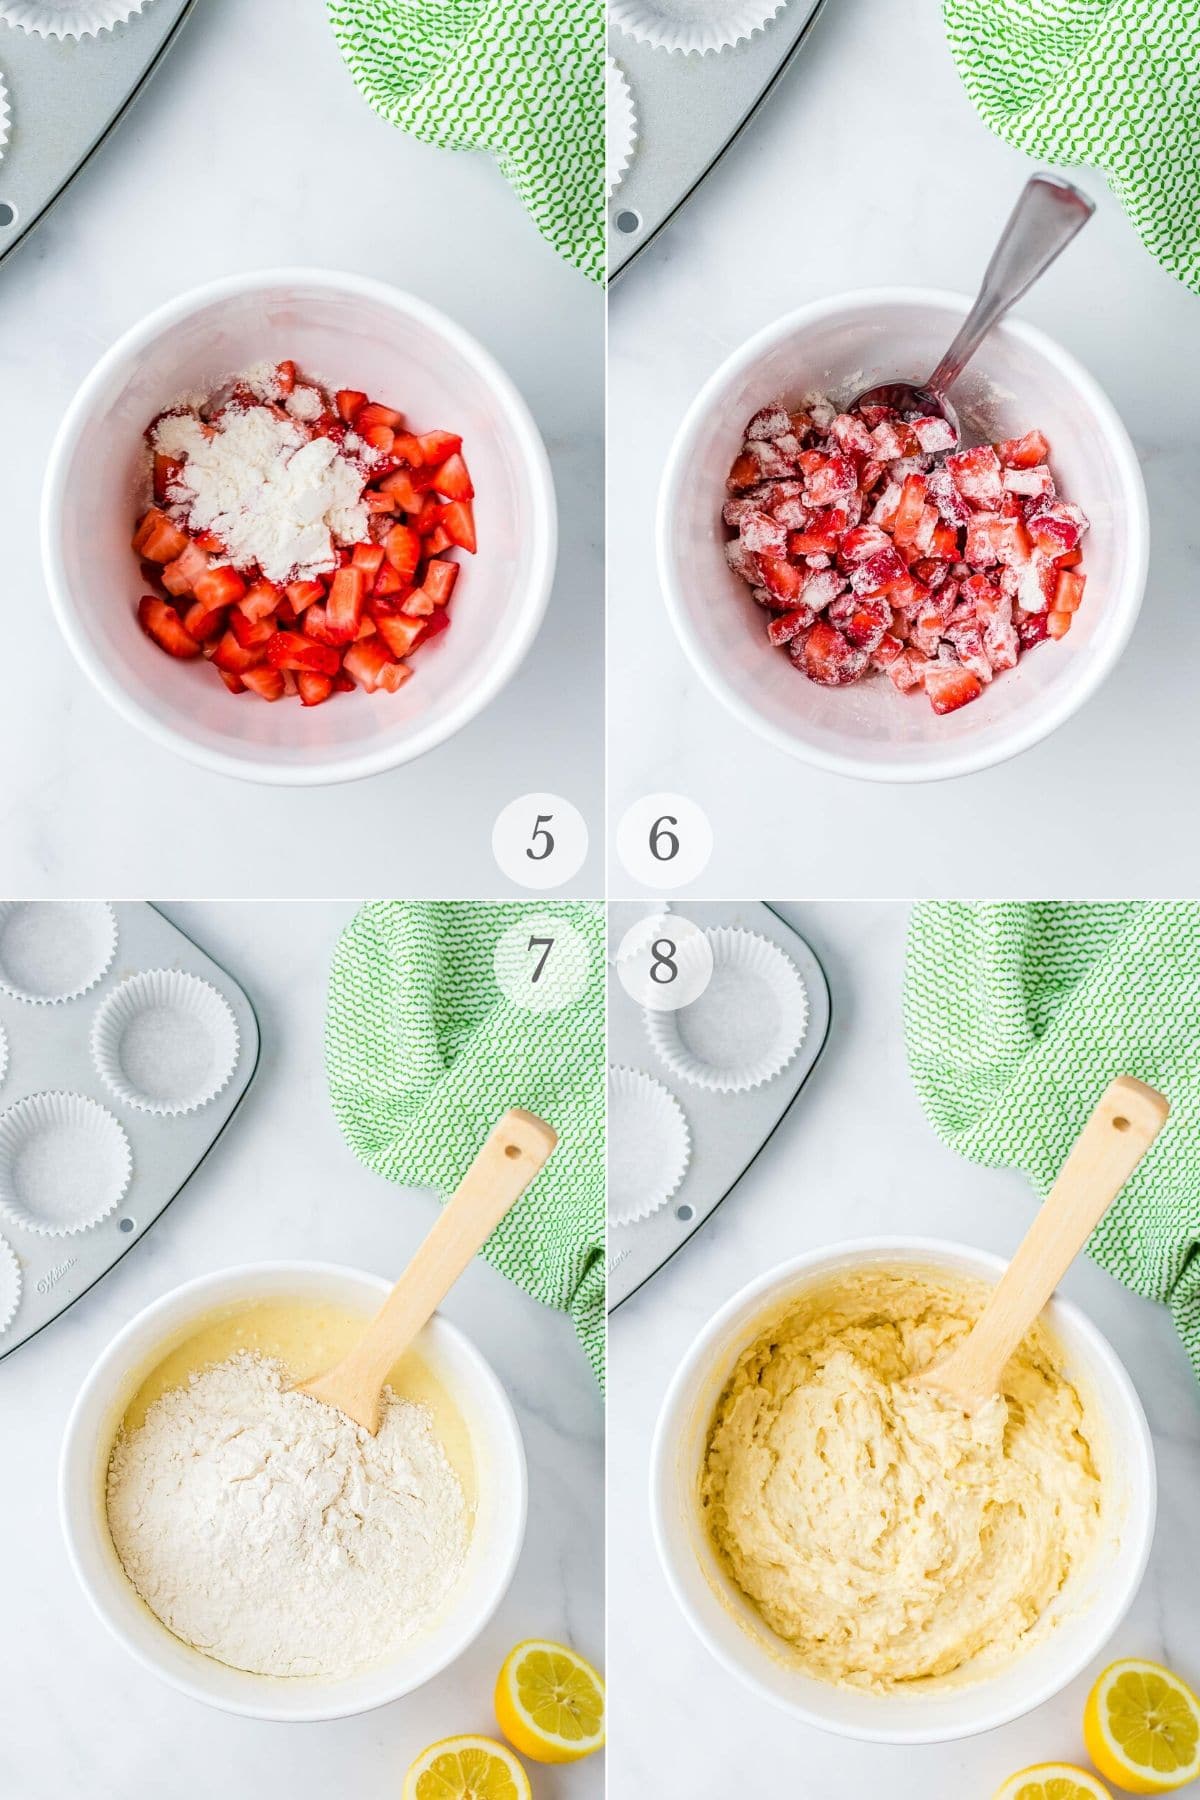 Strawberry Muffins recipes steps photos 5-8 (adding strawberries to the batter)